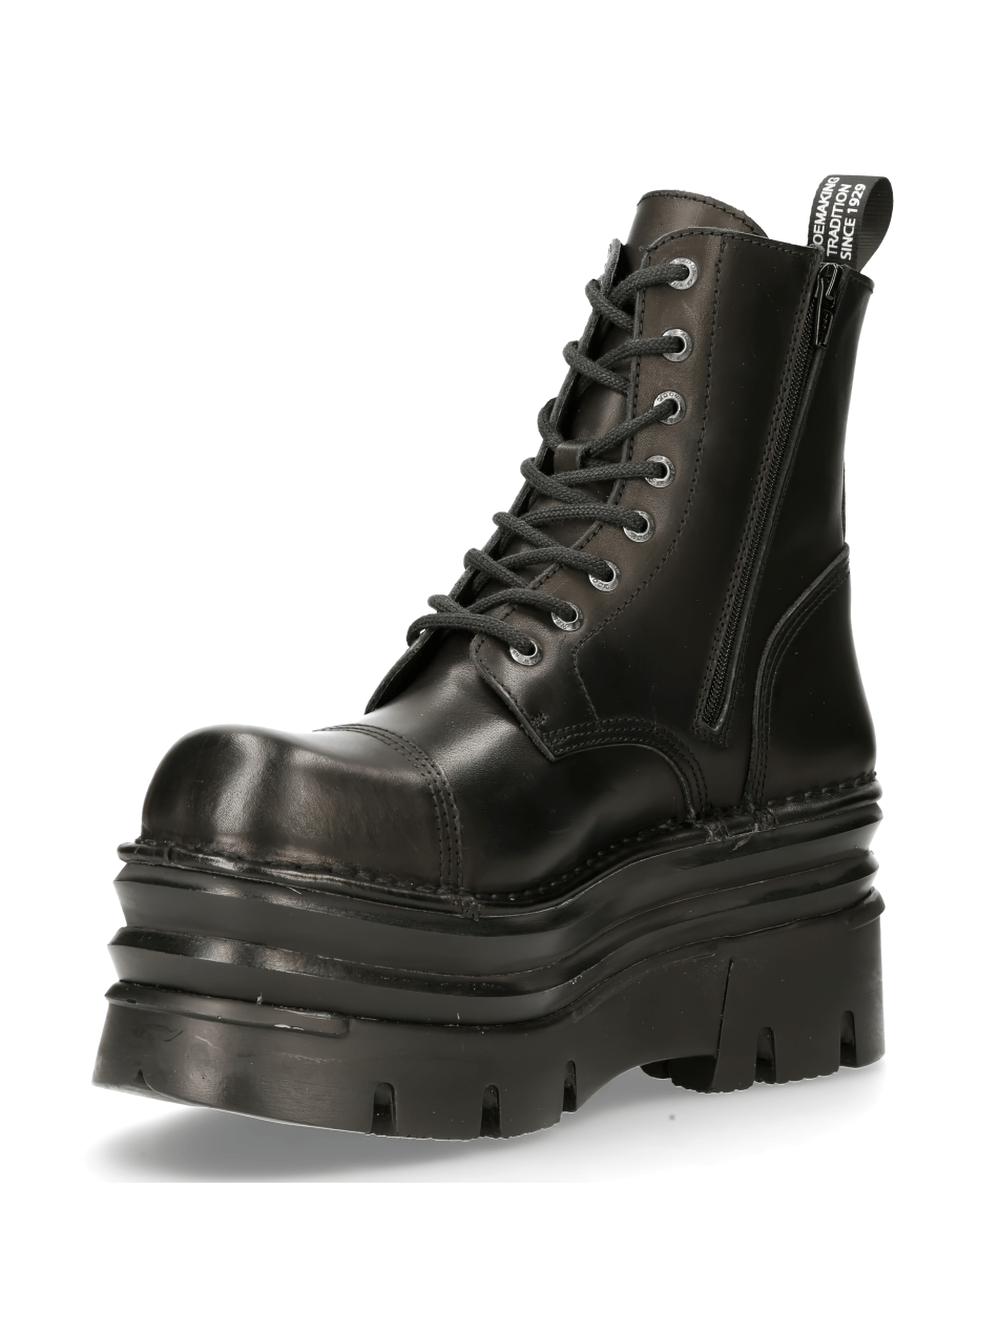 NEW ROCK Sturdy Black Military-Style Leather Boots